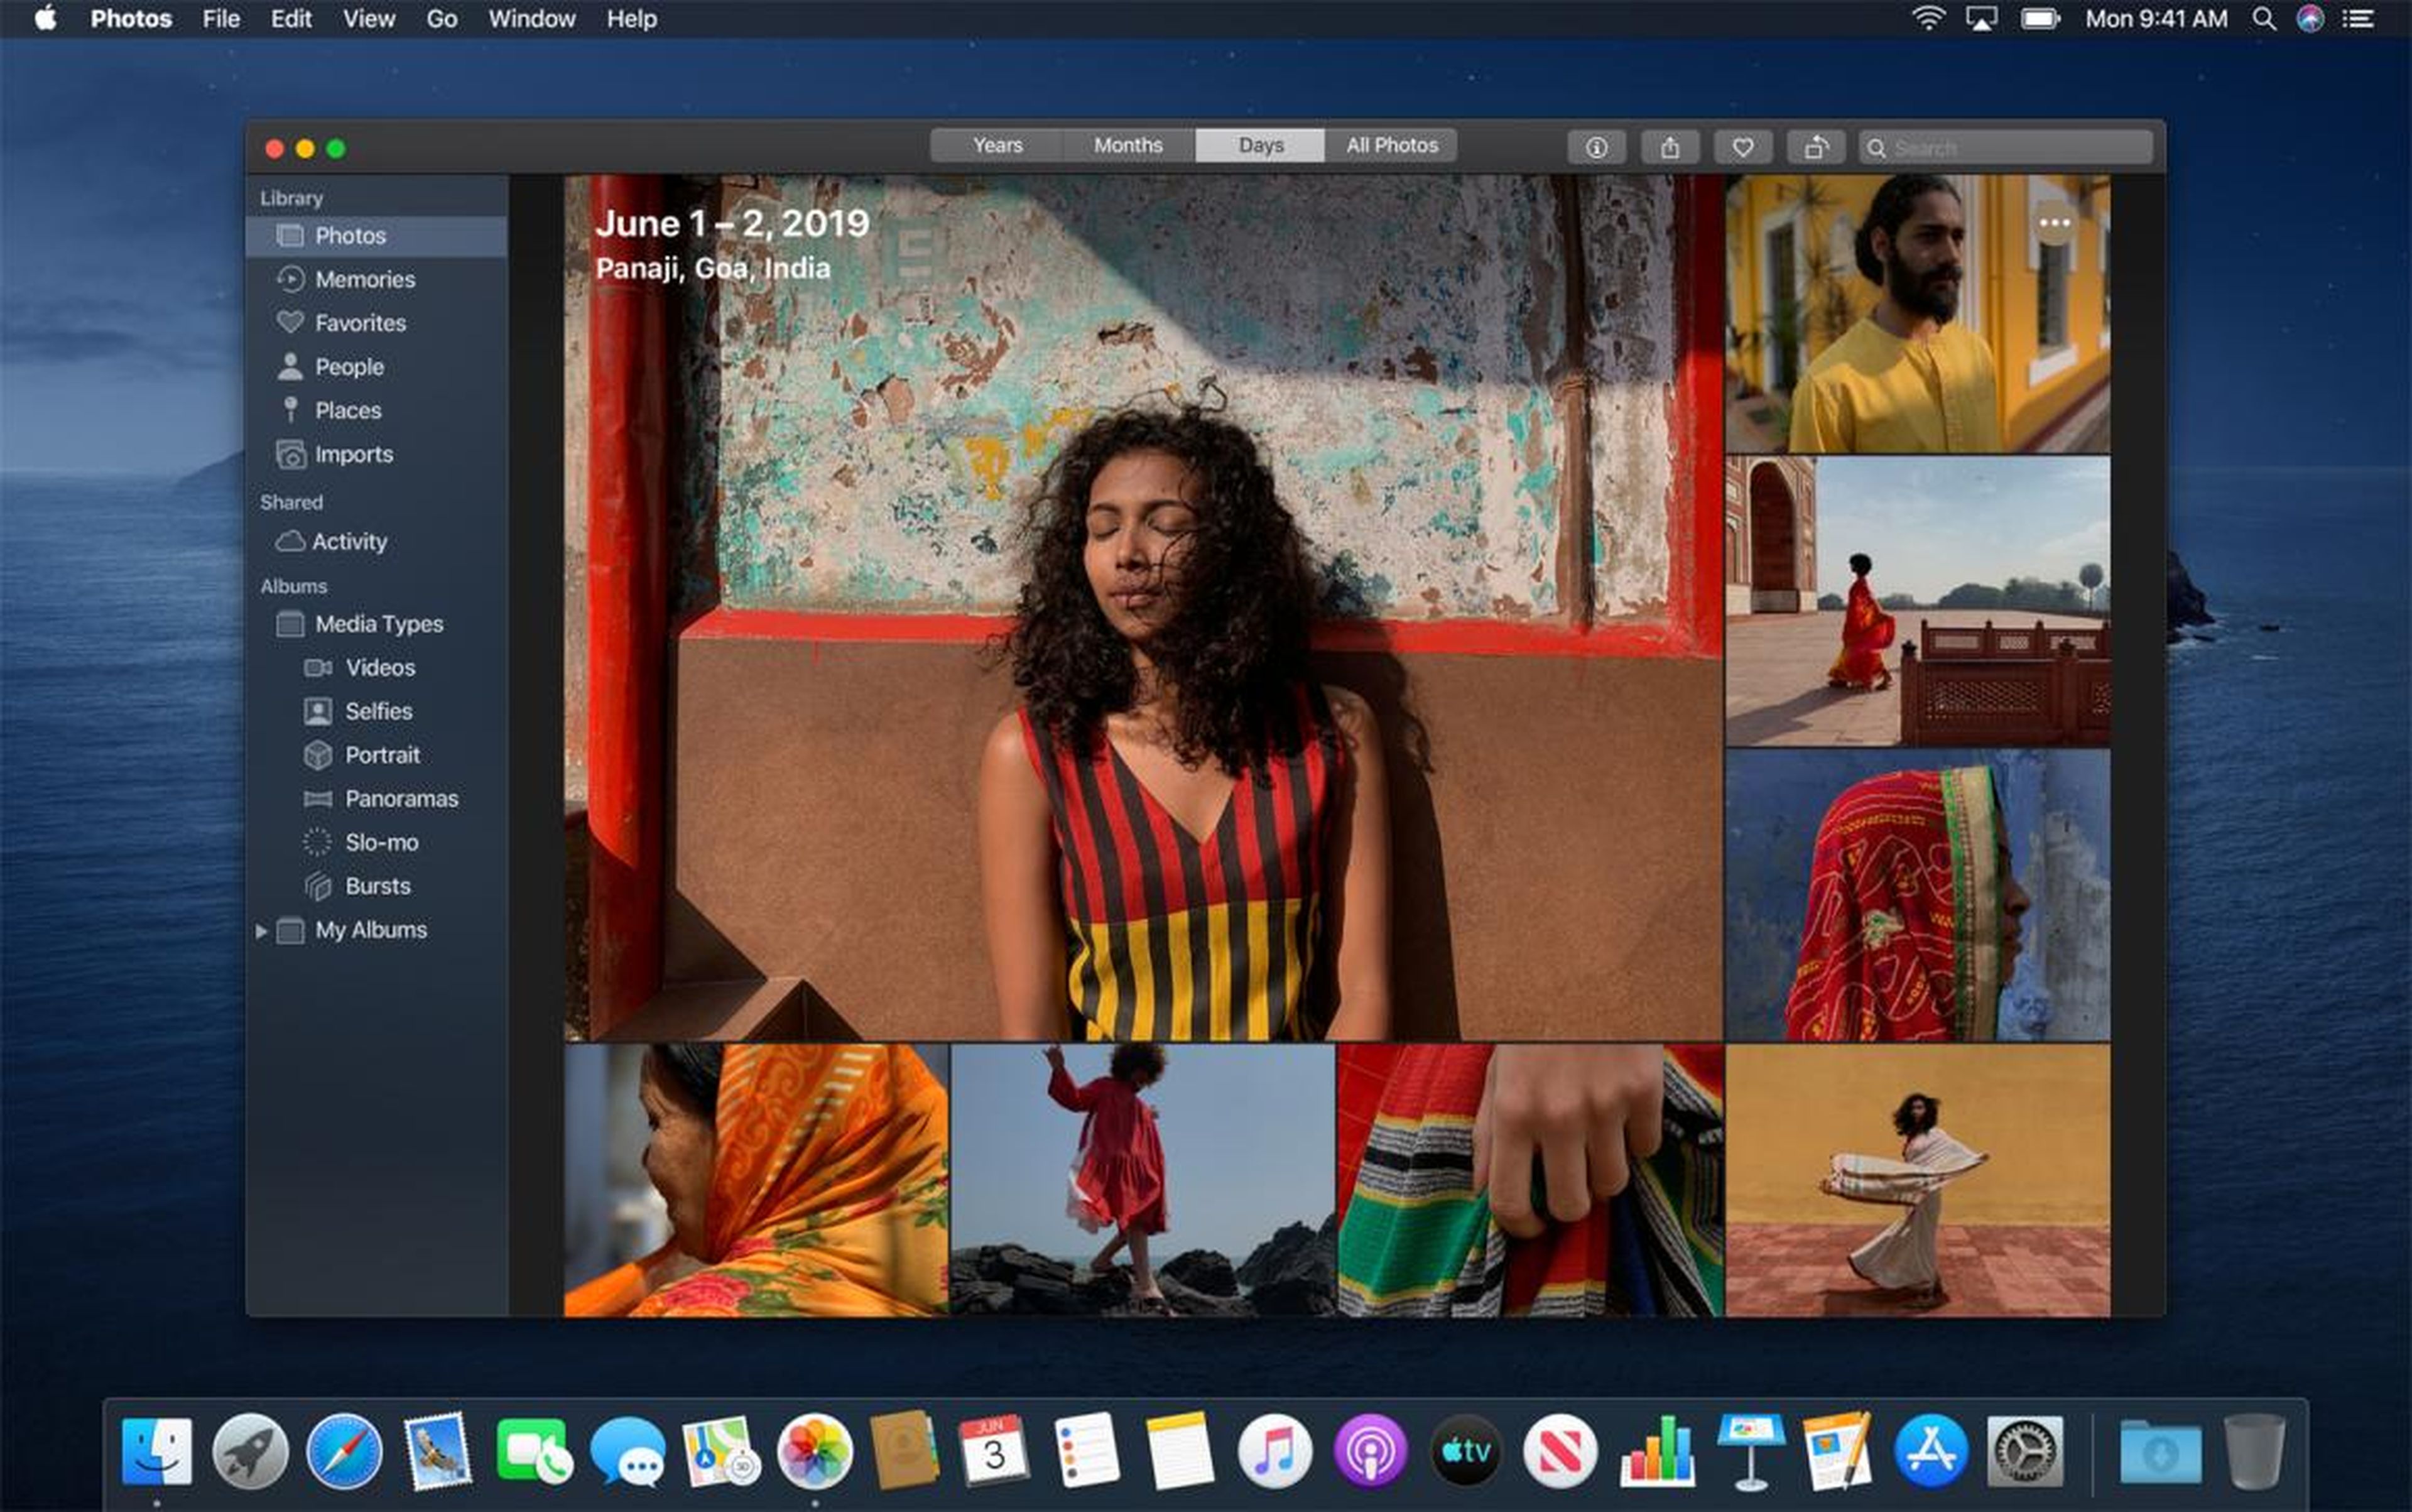 Standard Mac apps like Photos, Safari, and Reminders will also see improvements.